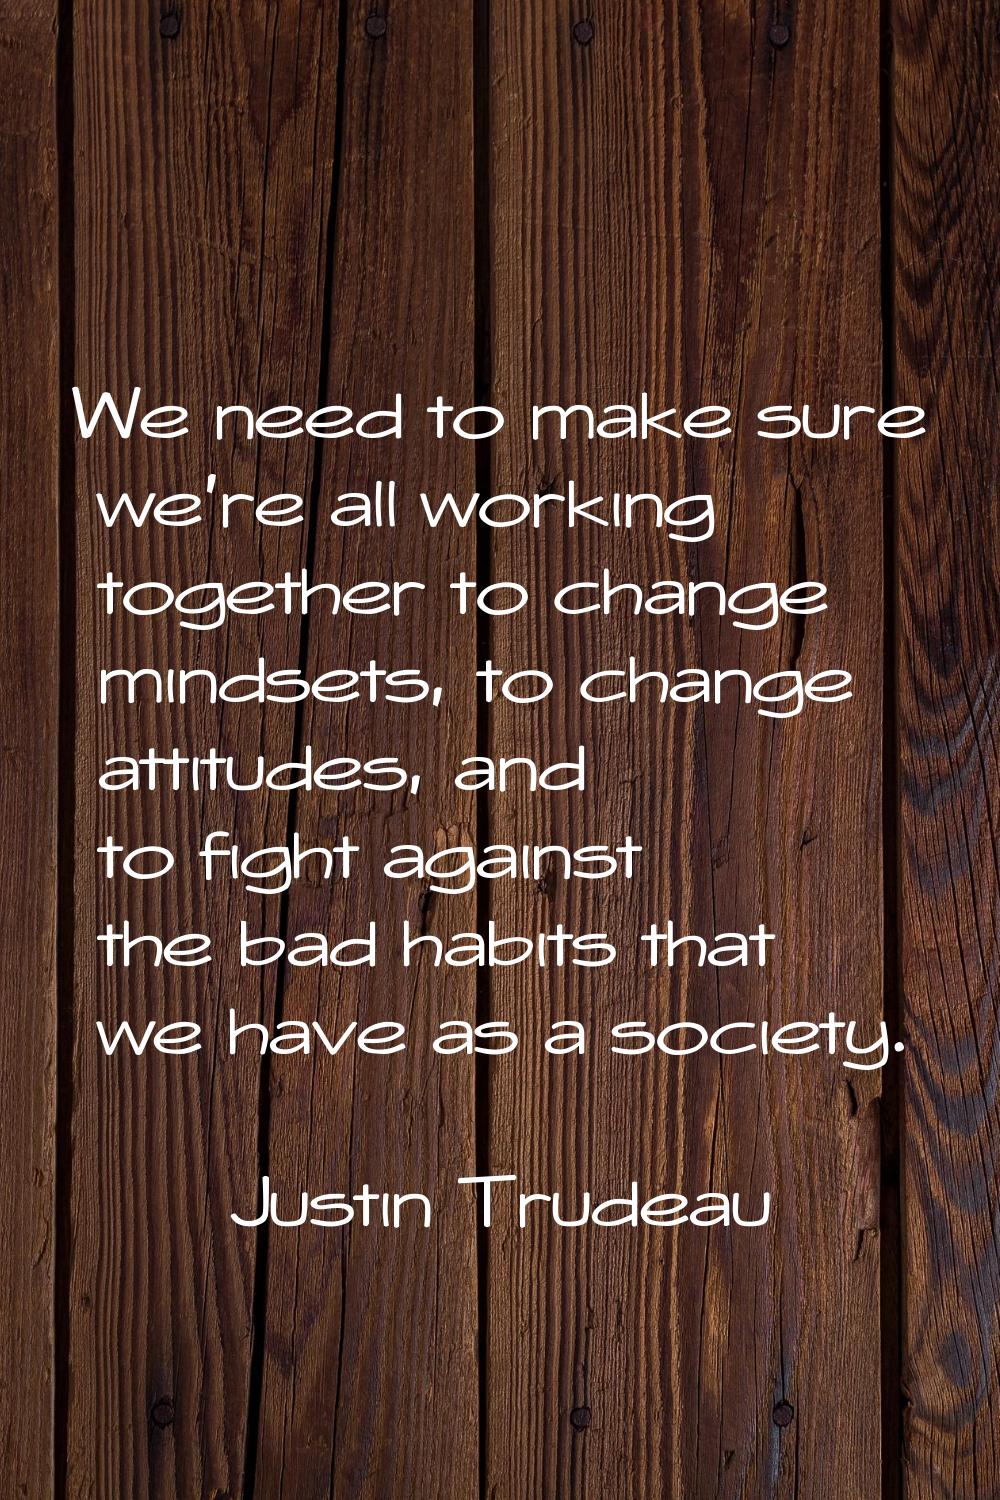 We need to make sure we're all working together to change mindsets, to change attitudes, and to fig